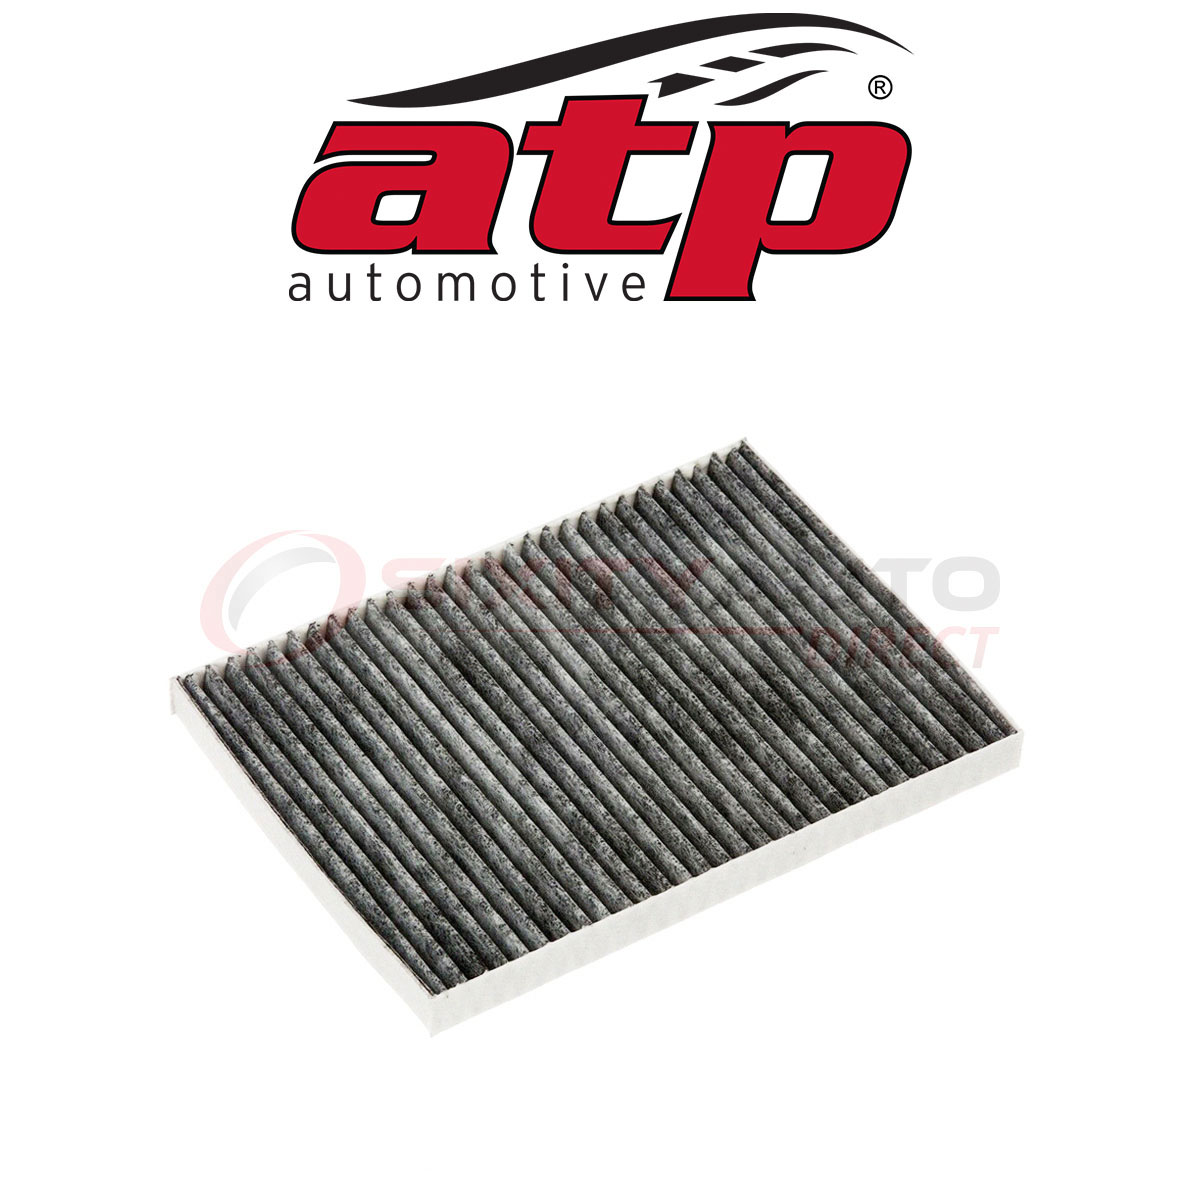 ATP Automotive Cabin Air Filter for 2017 GMC Acadia Limited 3.6L V6 - pc | eBay 2017 Gmc Acadia Limited Cabin Air Filter